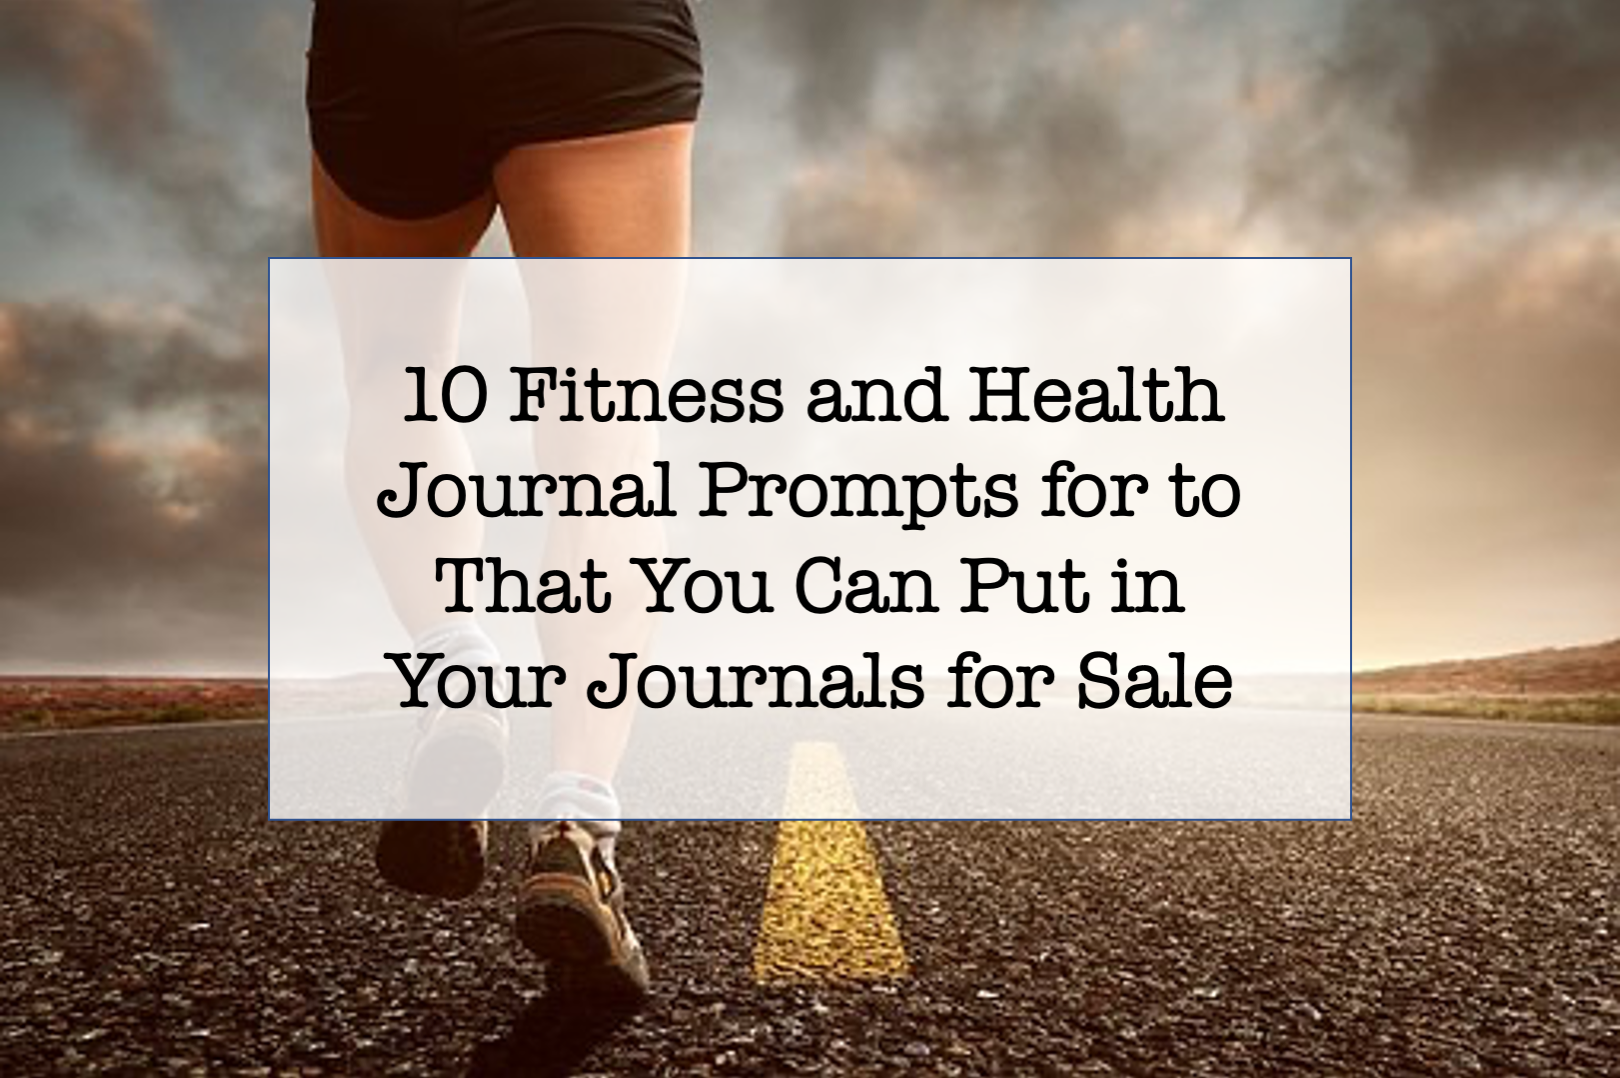 10 Fitness And Health Journal Prompts To Encourage Healthy Living - For ...